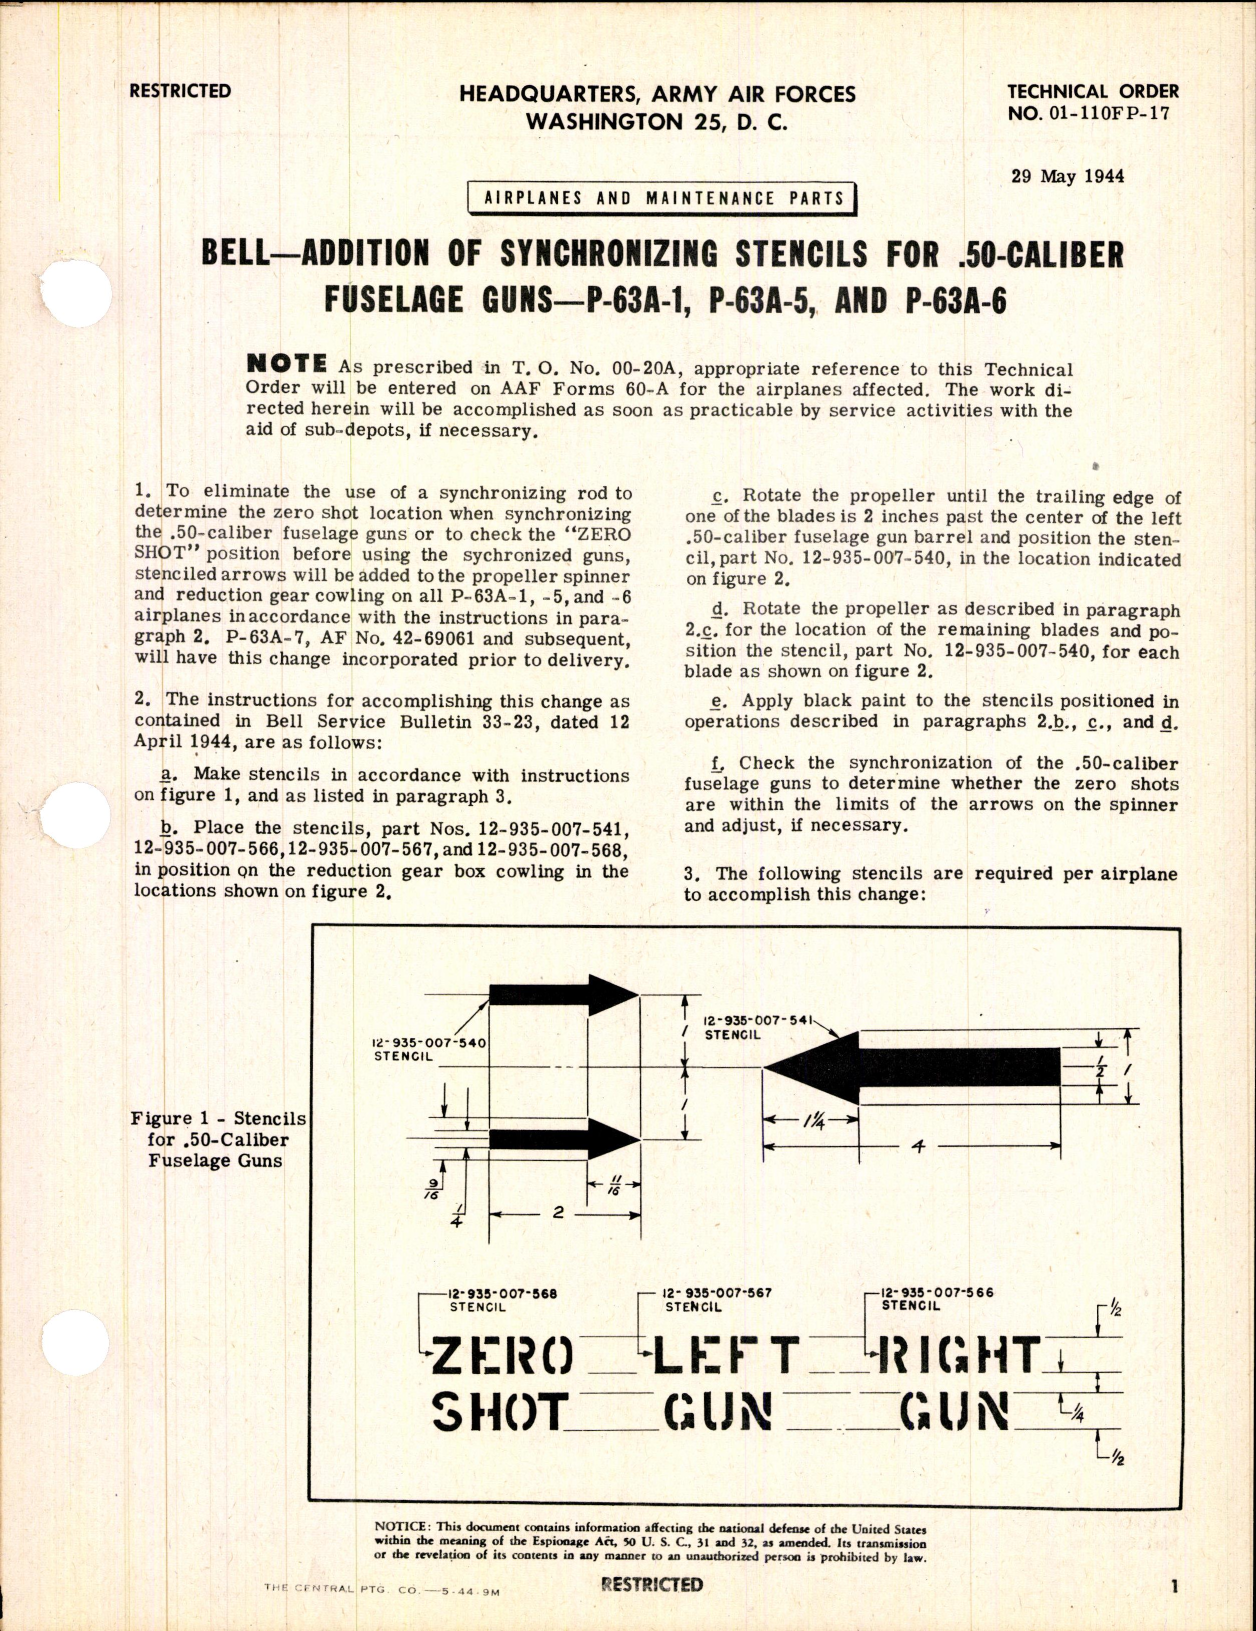 Sample page 1 from AirCorps Library document: Addition of Synchronizing Stencils - .50 Caliber Fuselage Guns